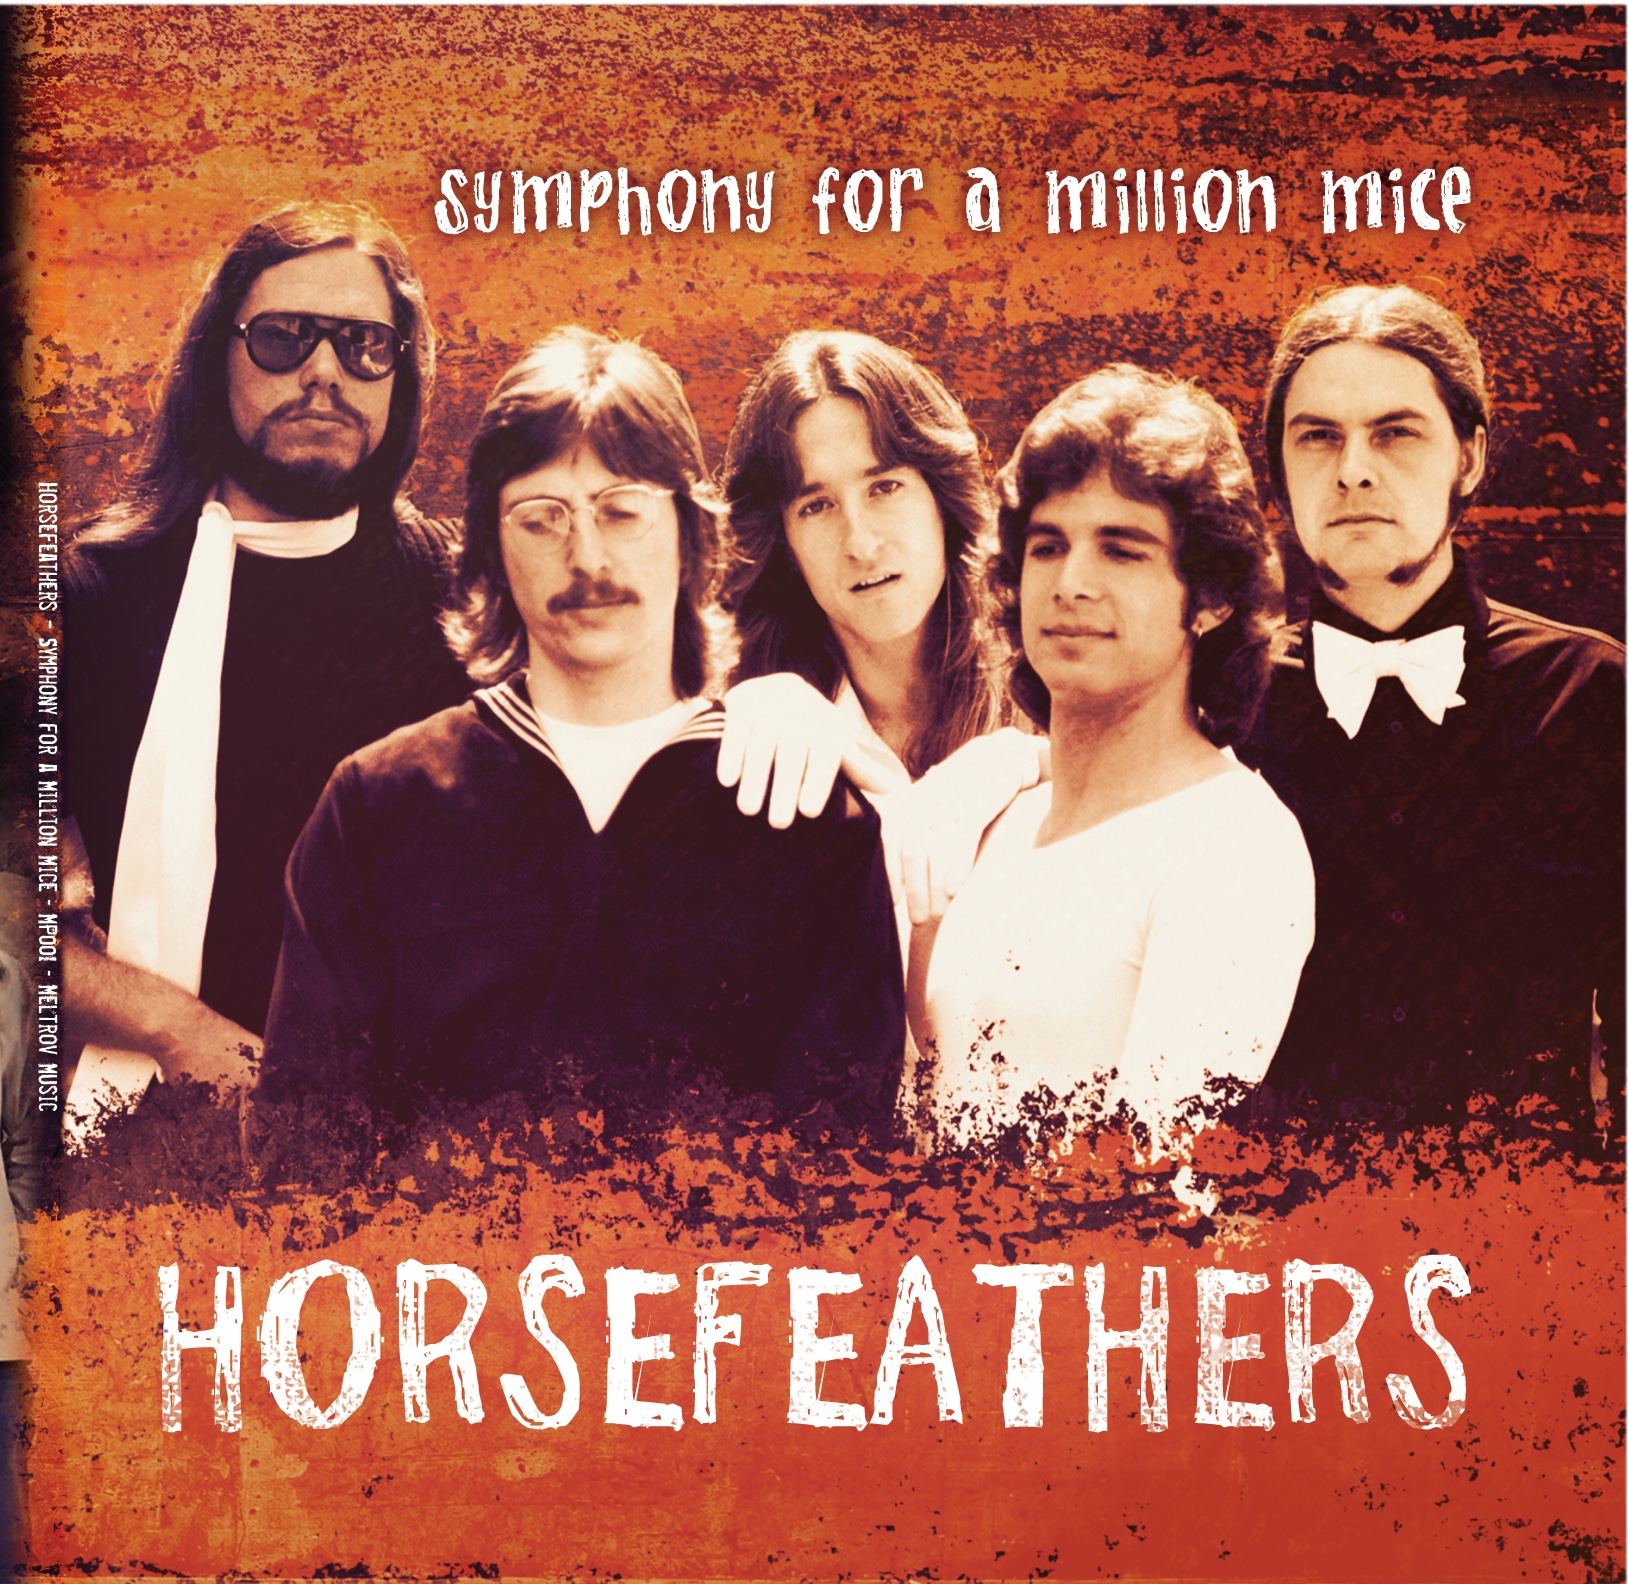 Horsefeathers CD Jacket Cover